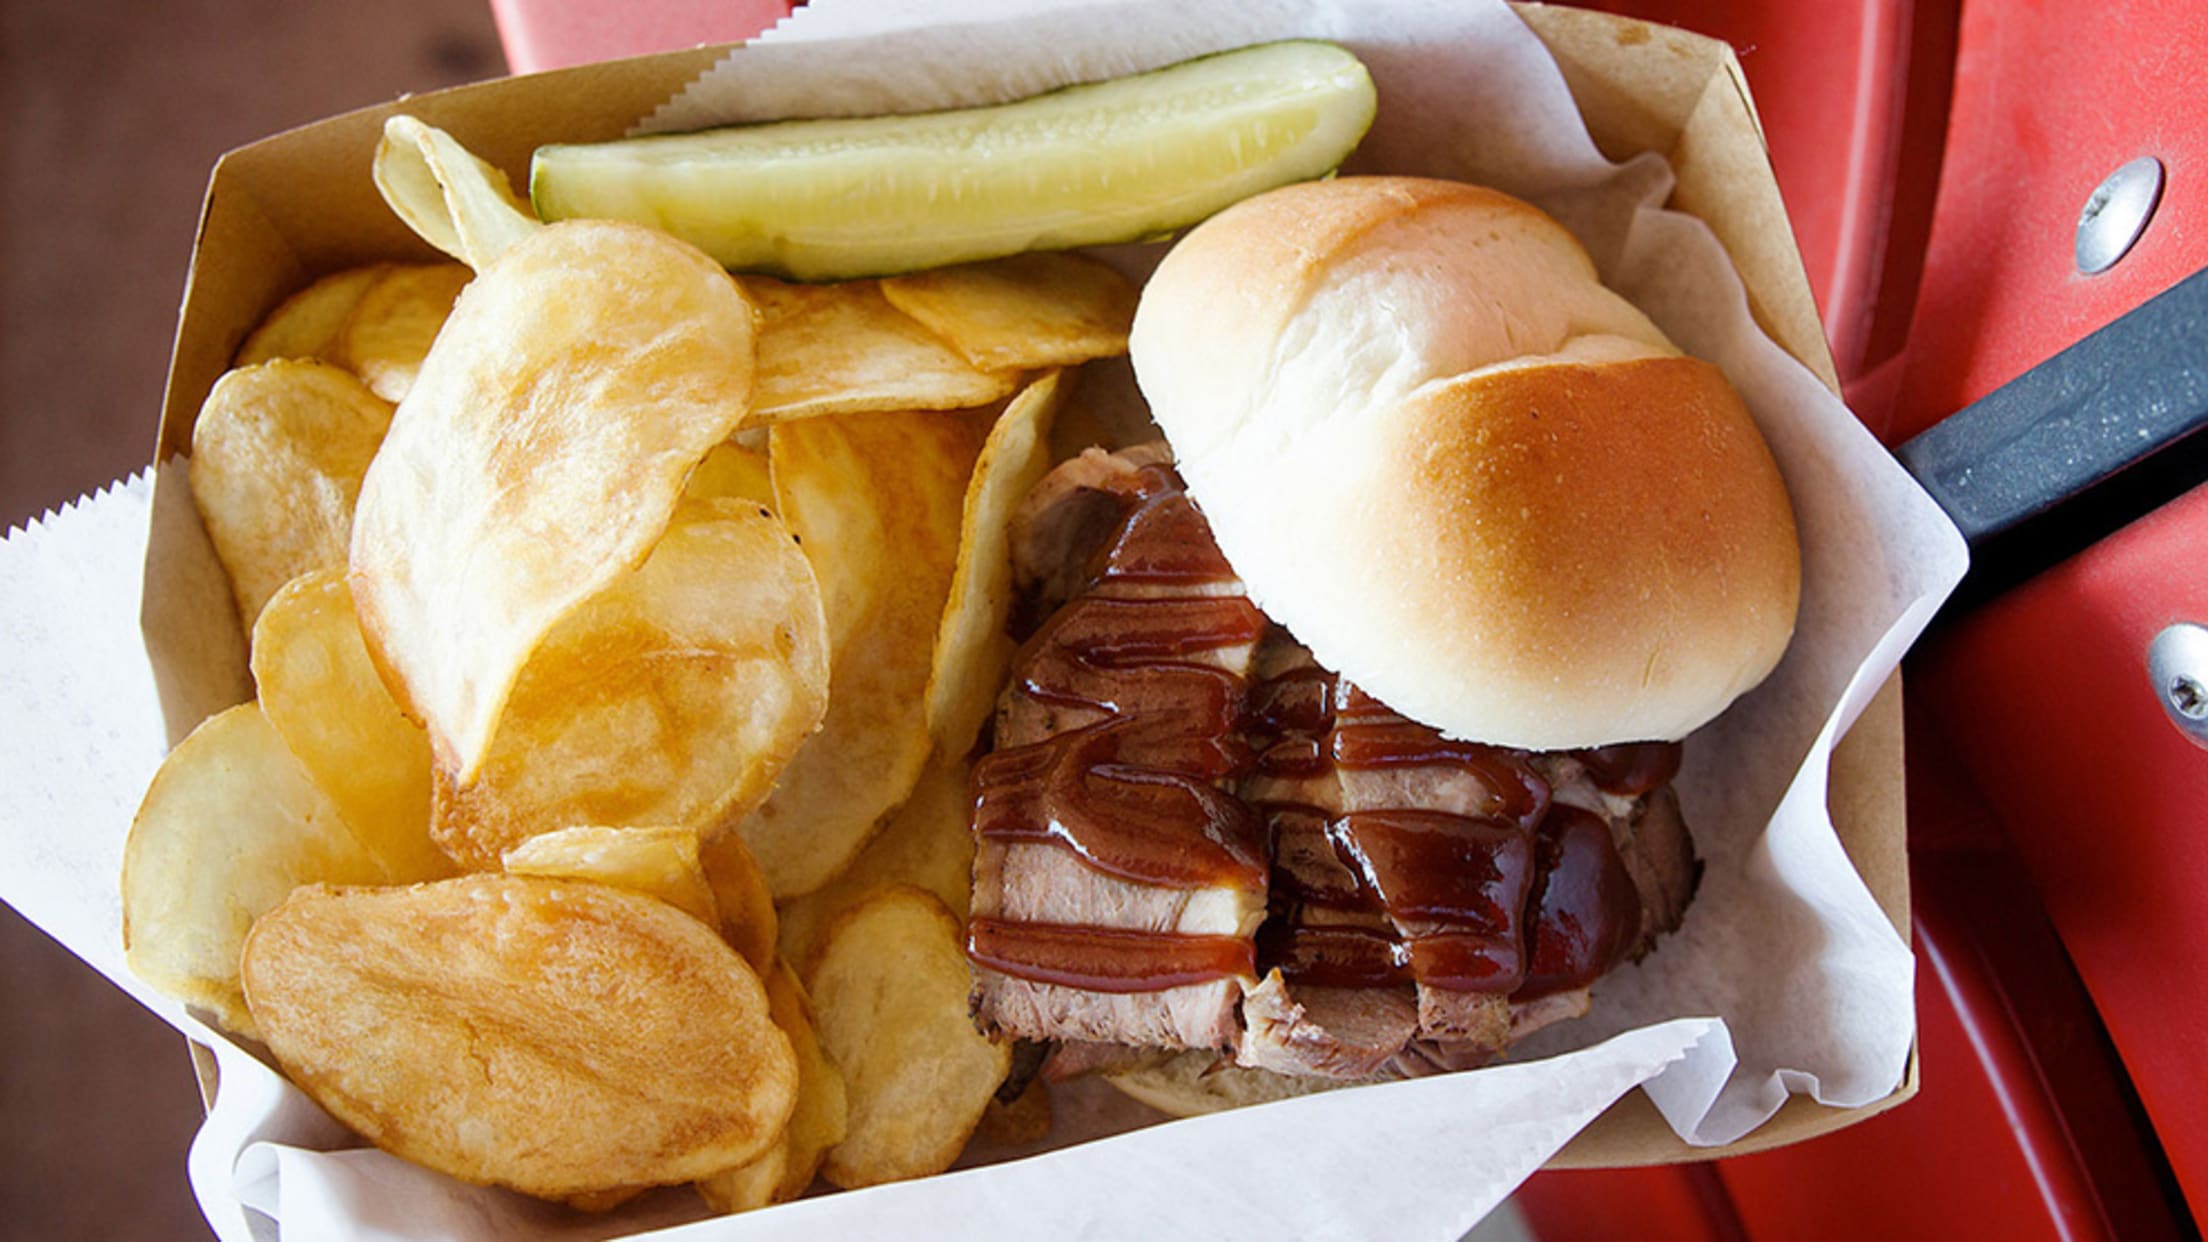 New food options at Busch Stadium for 2022